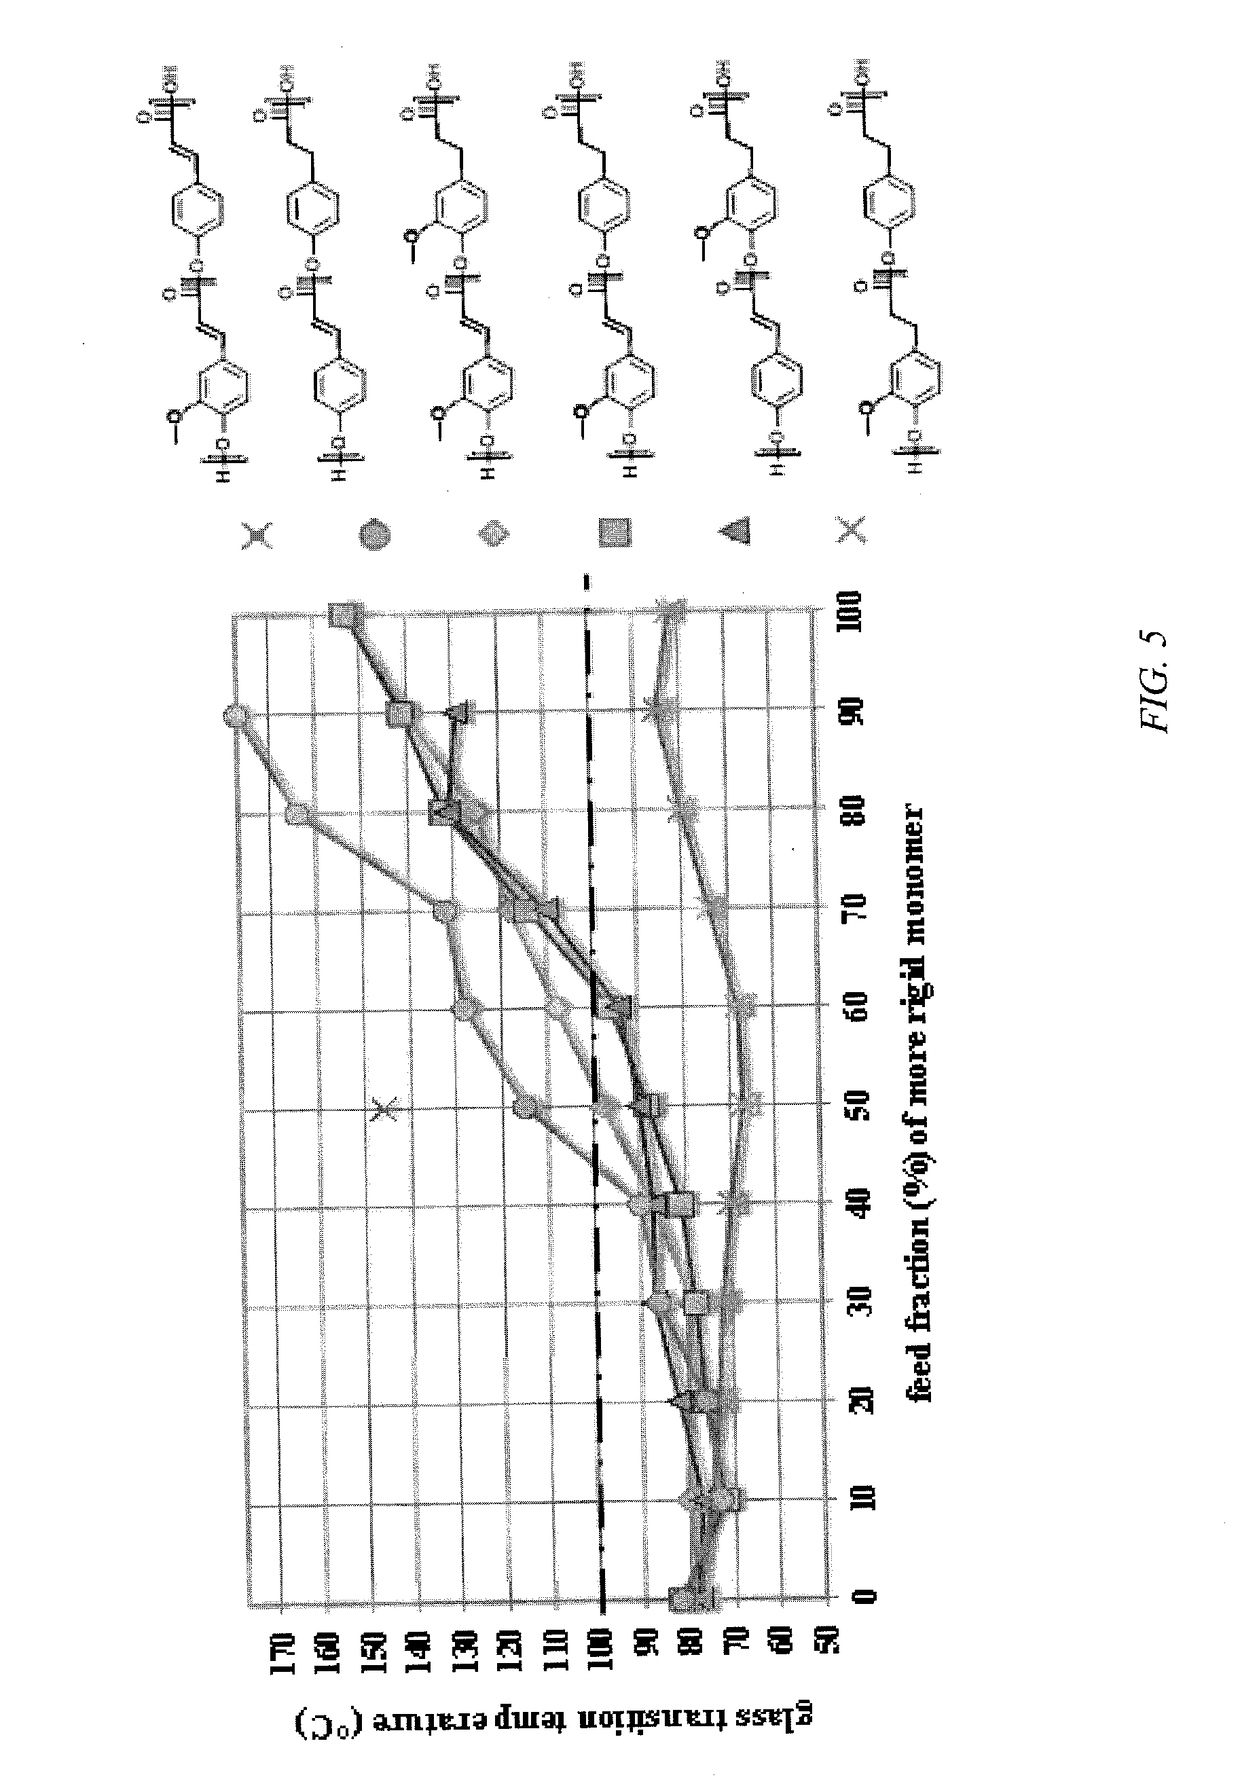 Ferulic acid and p-coumaric acid based polymers and copolymers